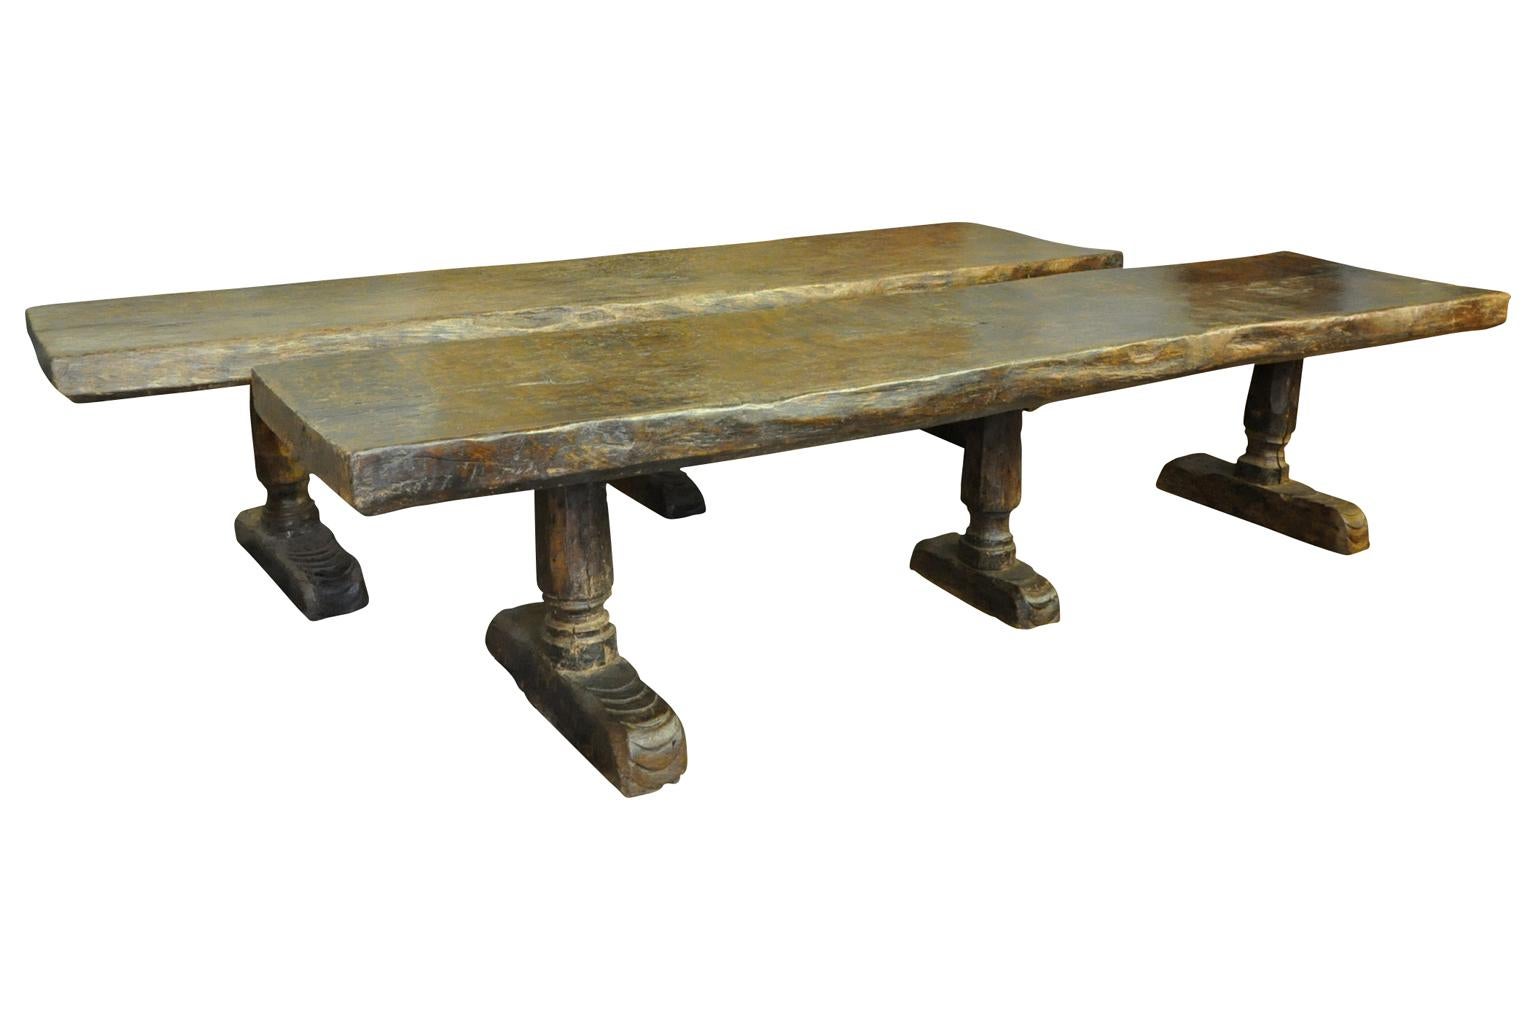 A pair of monumental and very rare 16th century castle tables - trestle tables from the South of Spain. These truly exceptional tables are very sturdily constructed from richly stained green oak with sensational and very thick solid board tops,